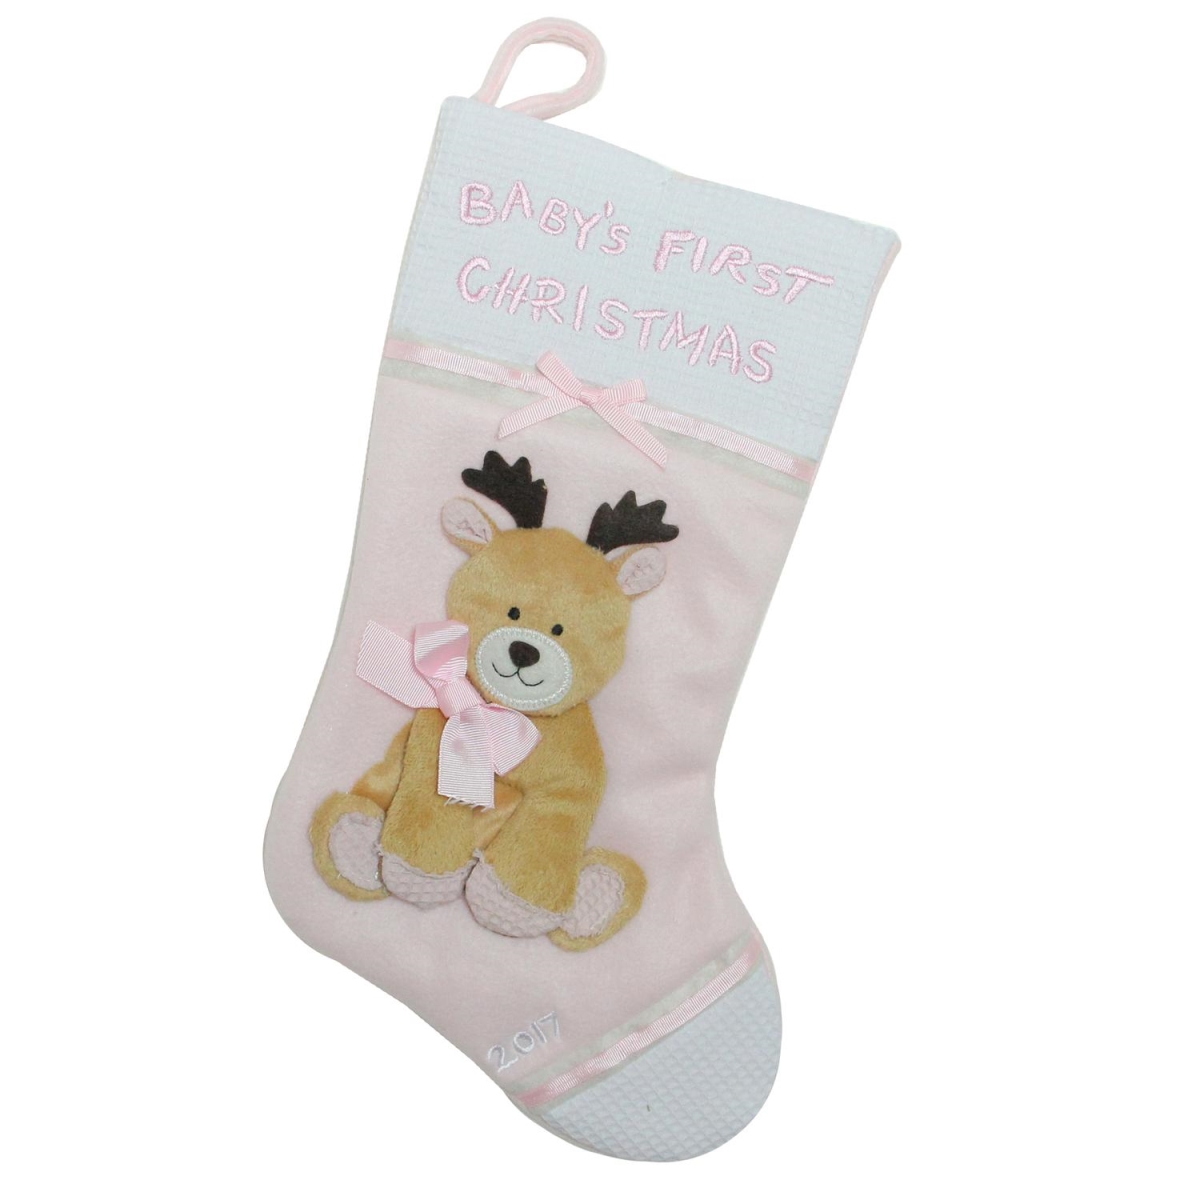 32629164 16 In. Pink & White Babys First Christmas With Reindeer Applique Fleece Christmas Stocking